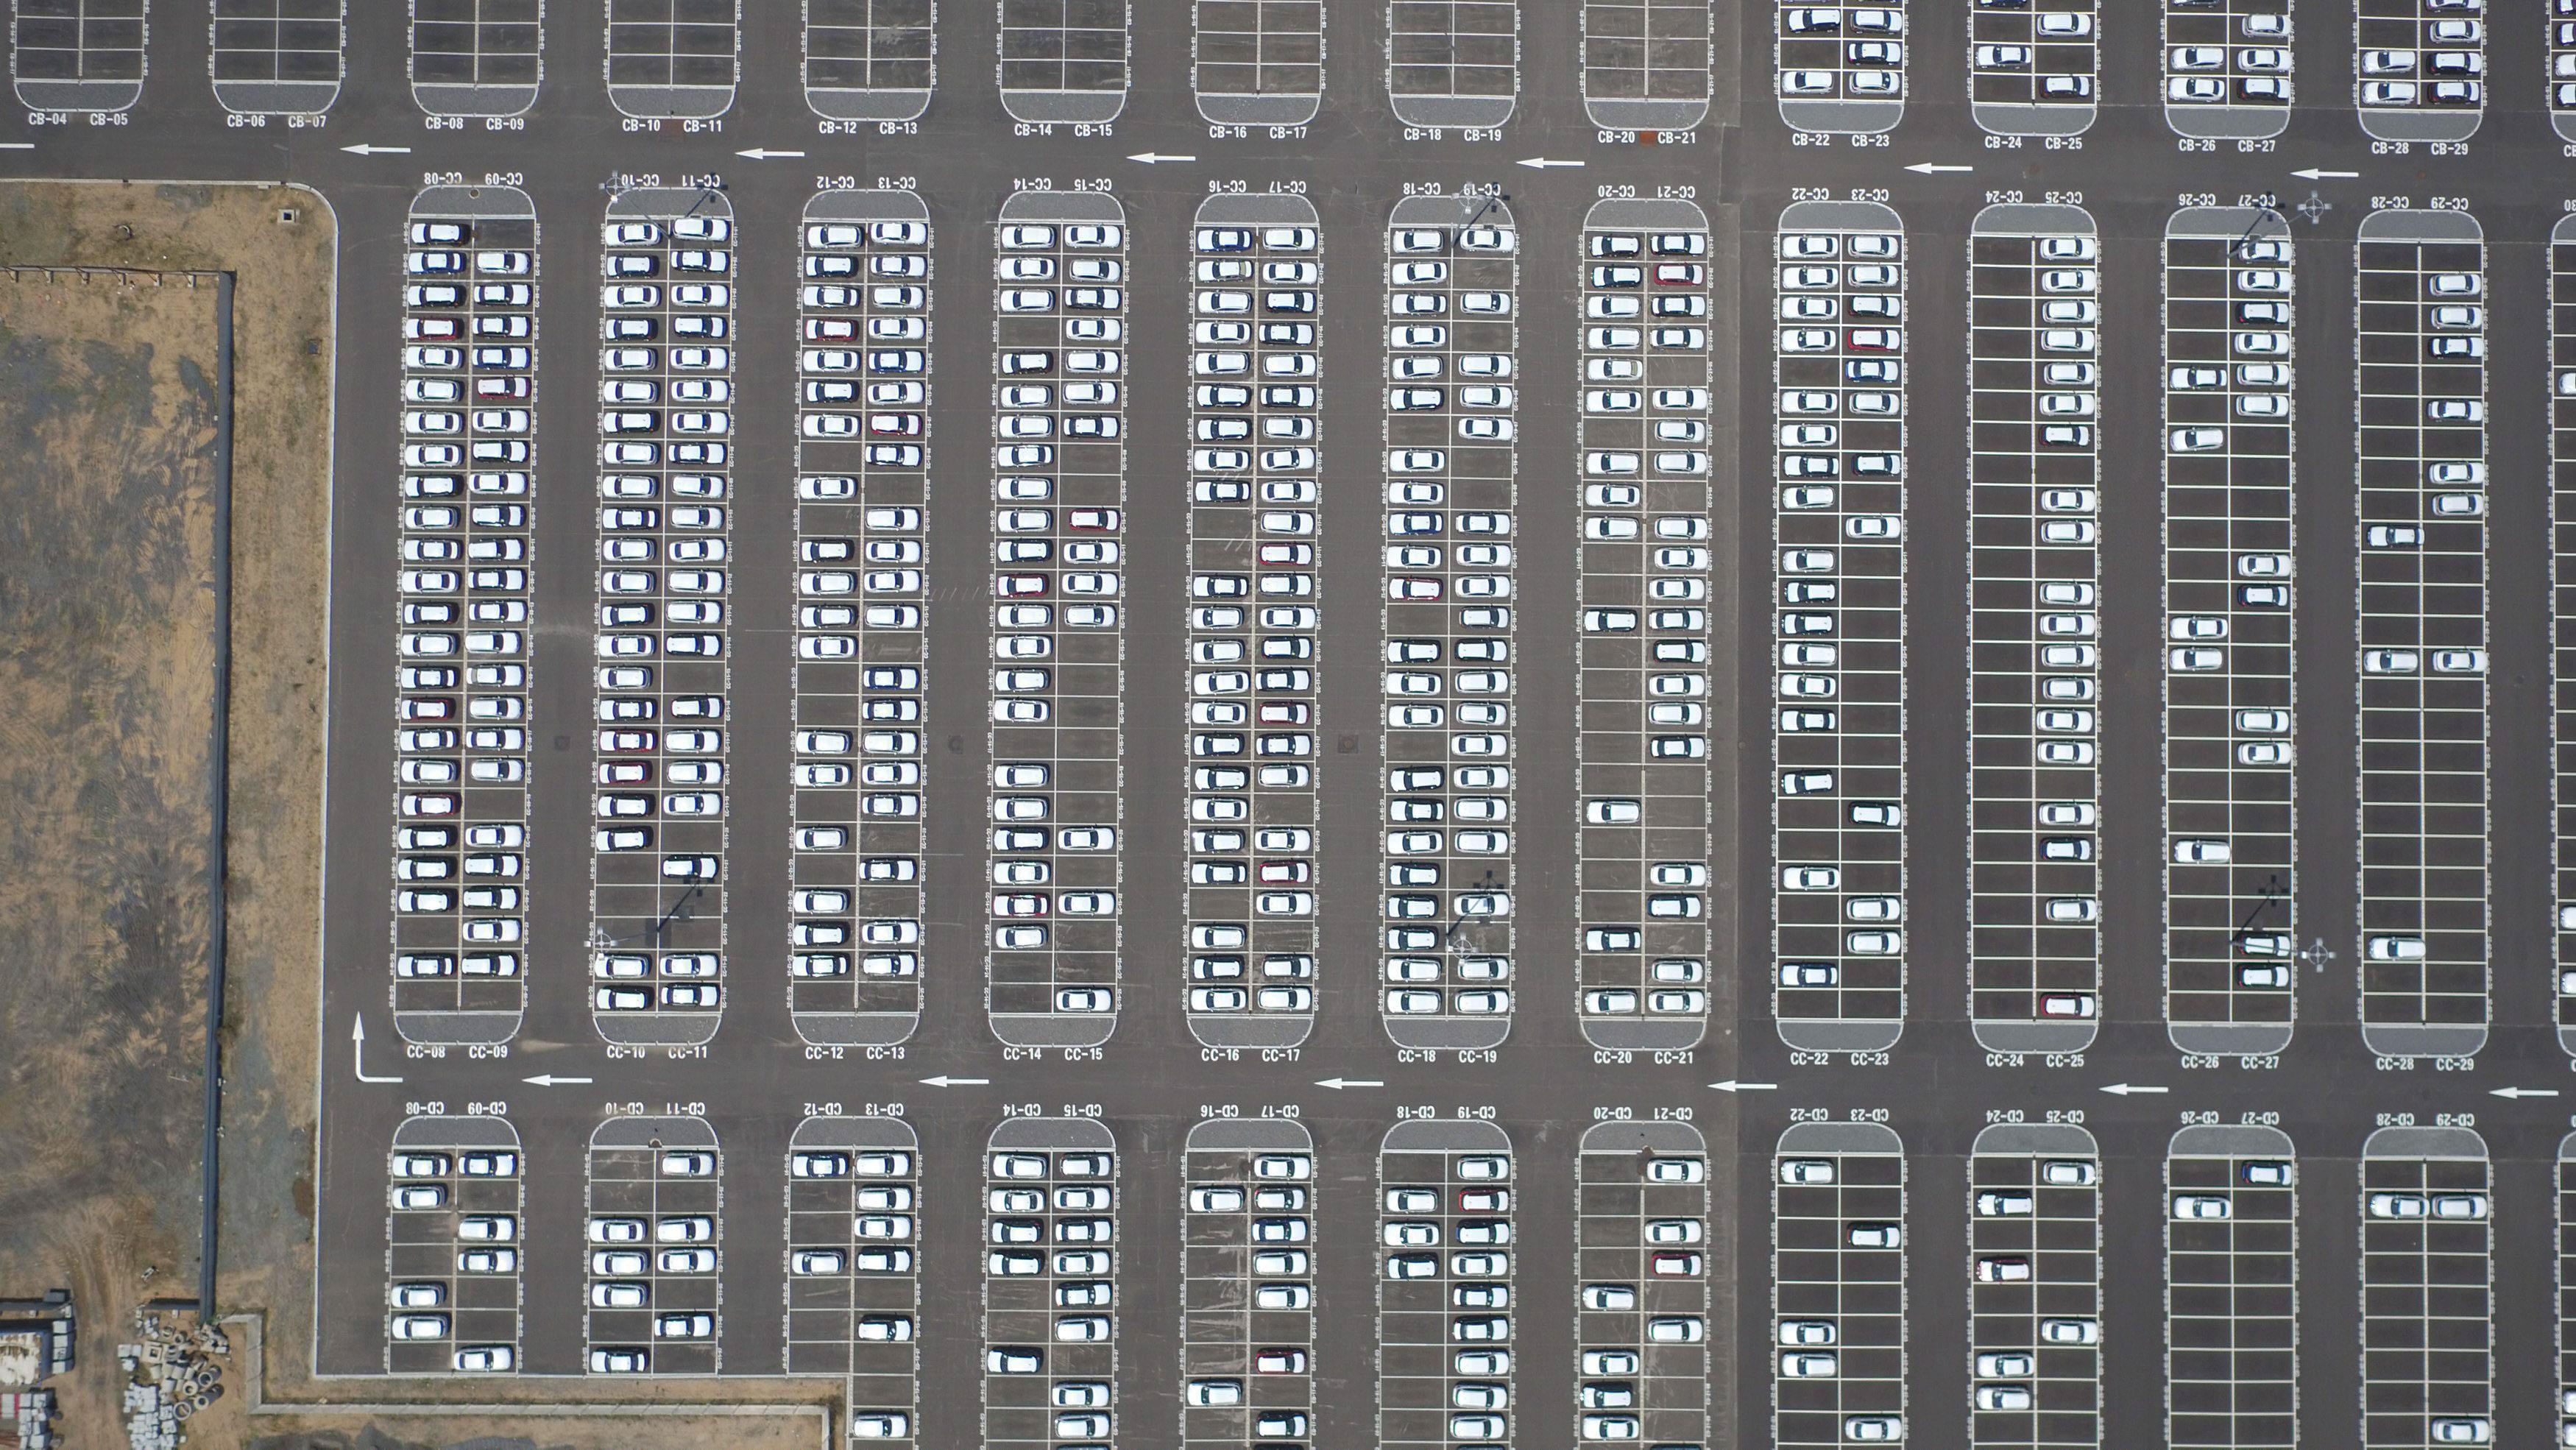 An aerial view shows automobiles that are parked at a factory in Shenyang, Liaoning Province, China